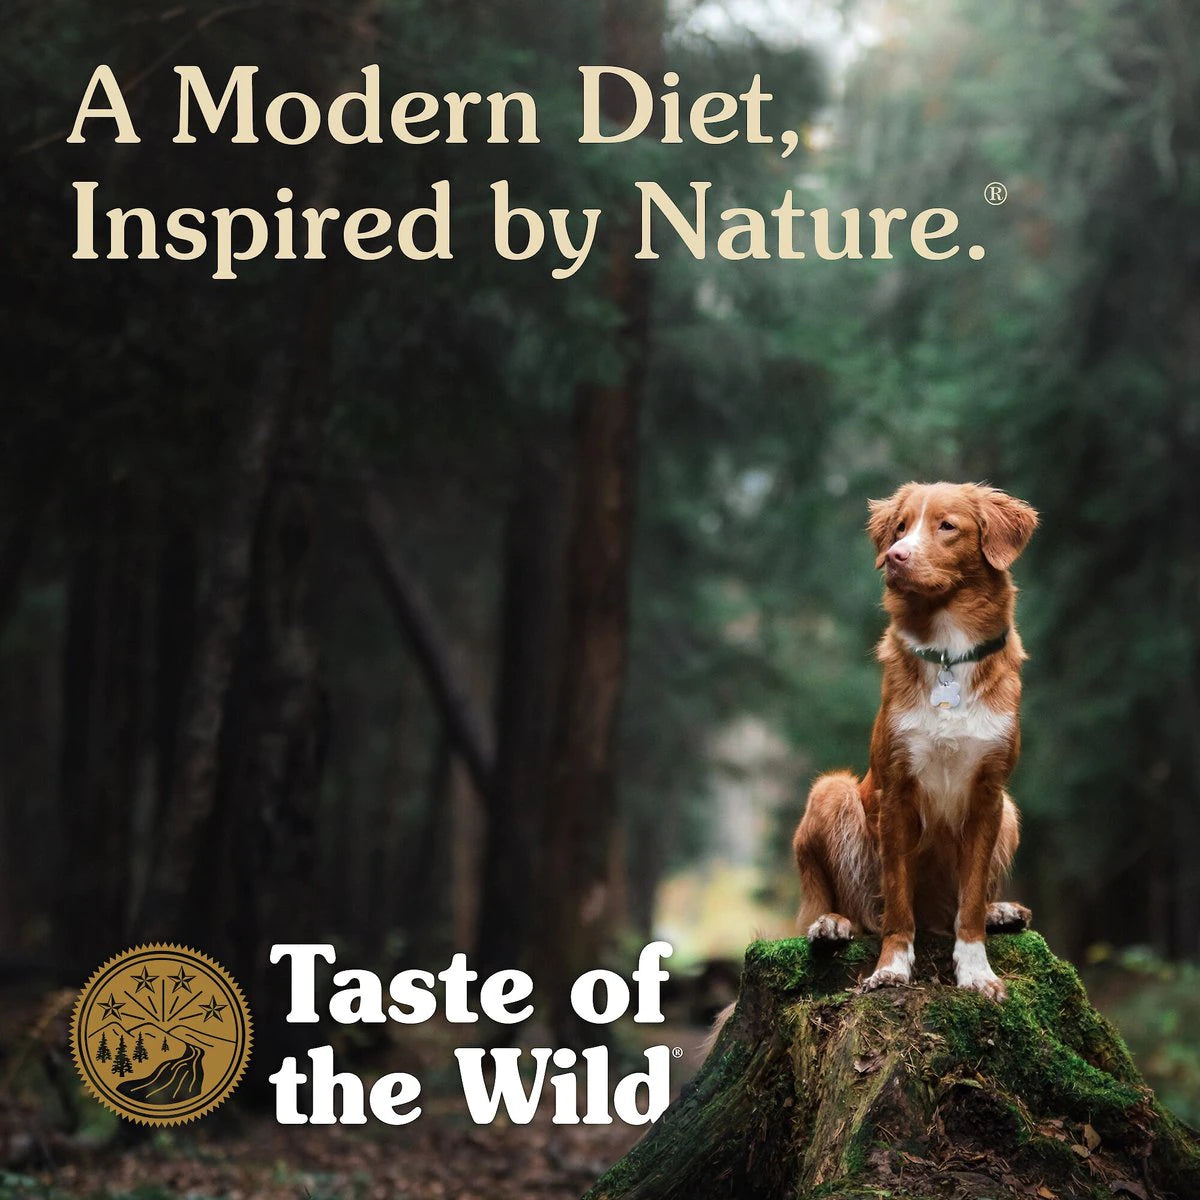 Taste Of The Wild Ancient Prairie Dog Food - Mutts & Co.